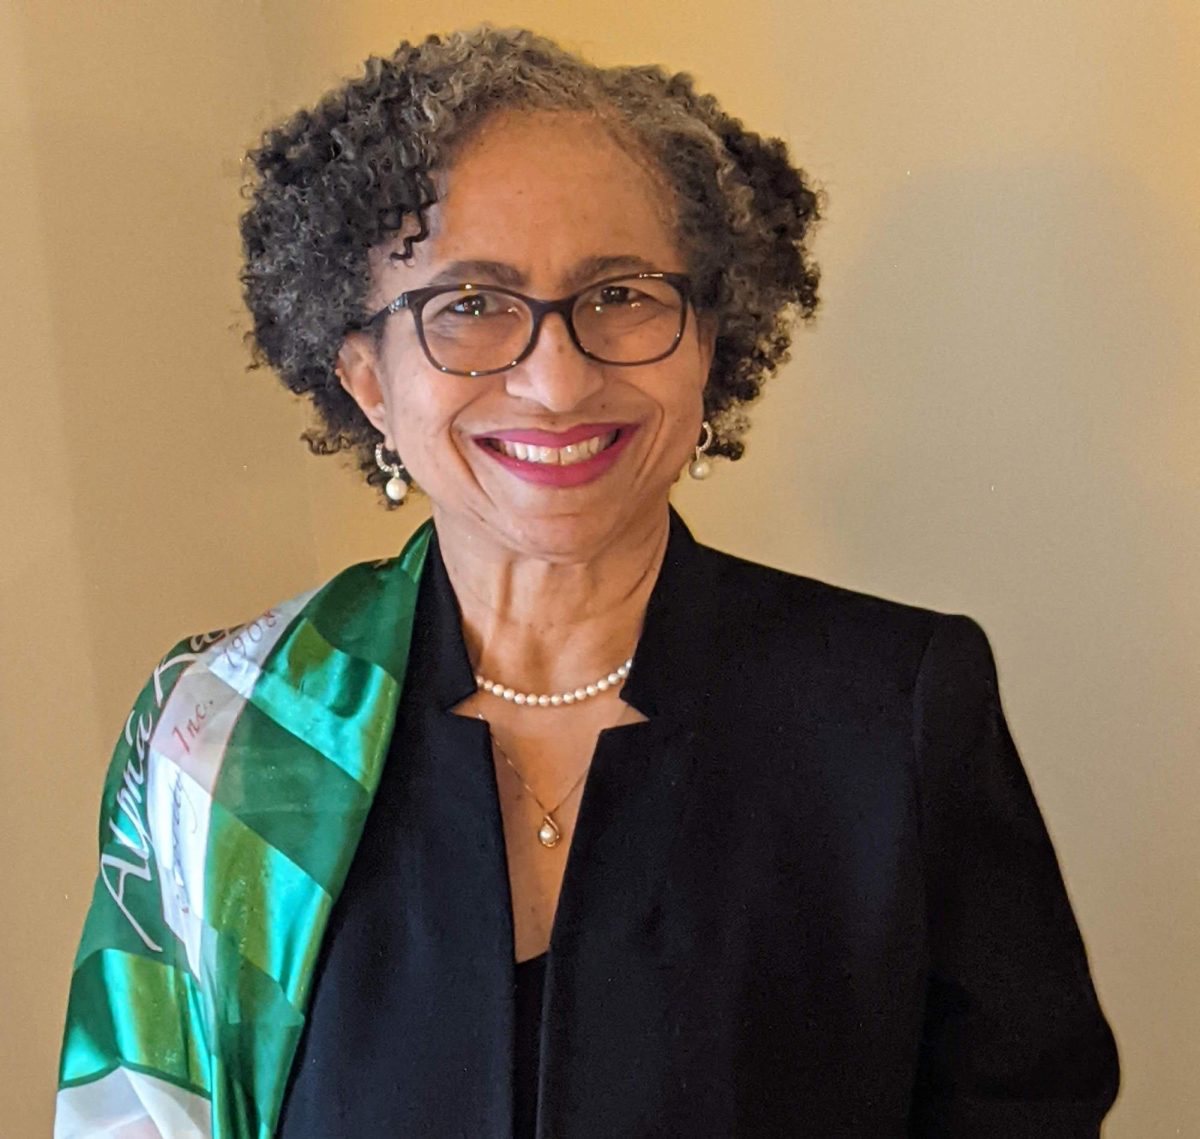 Pamela Hopson, executive director of Multicultural Center, has been on campus for 45 years and is one of the longest standing faculty members on campus.